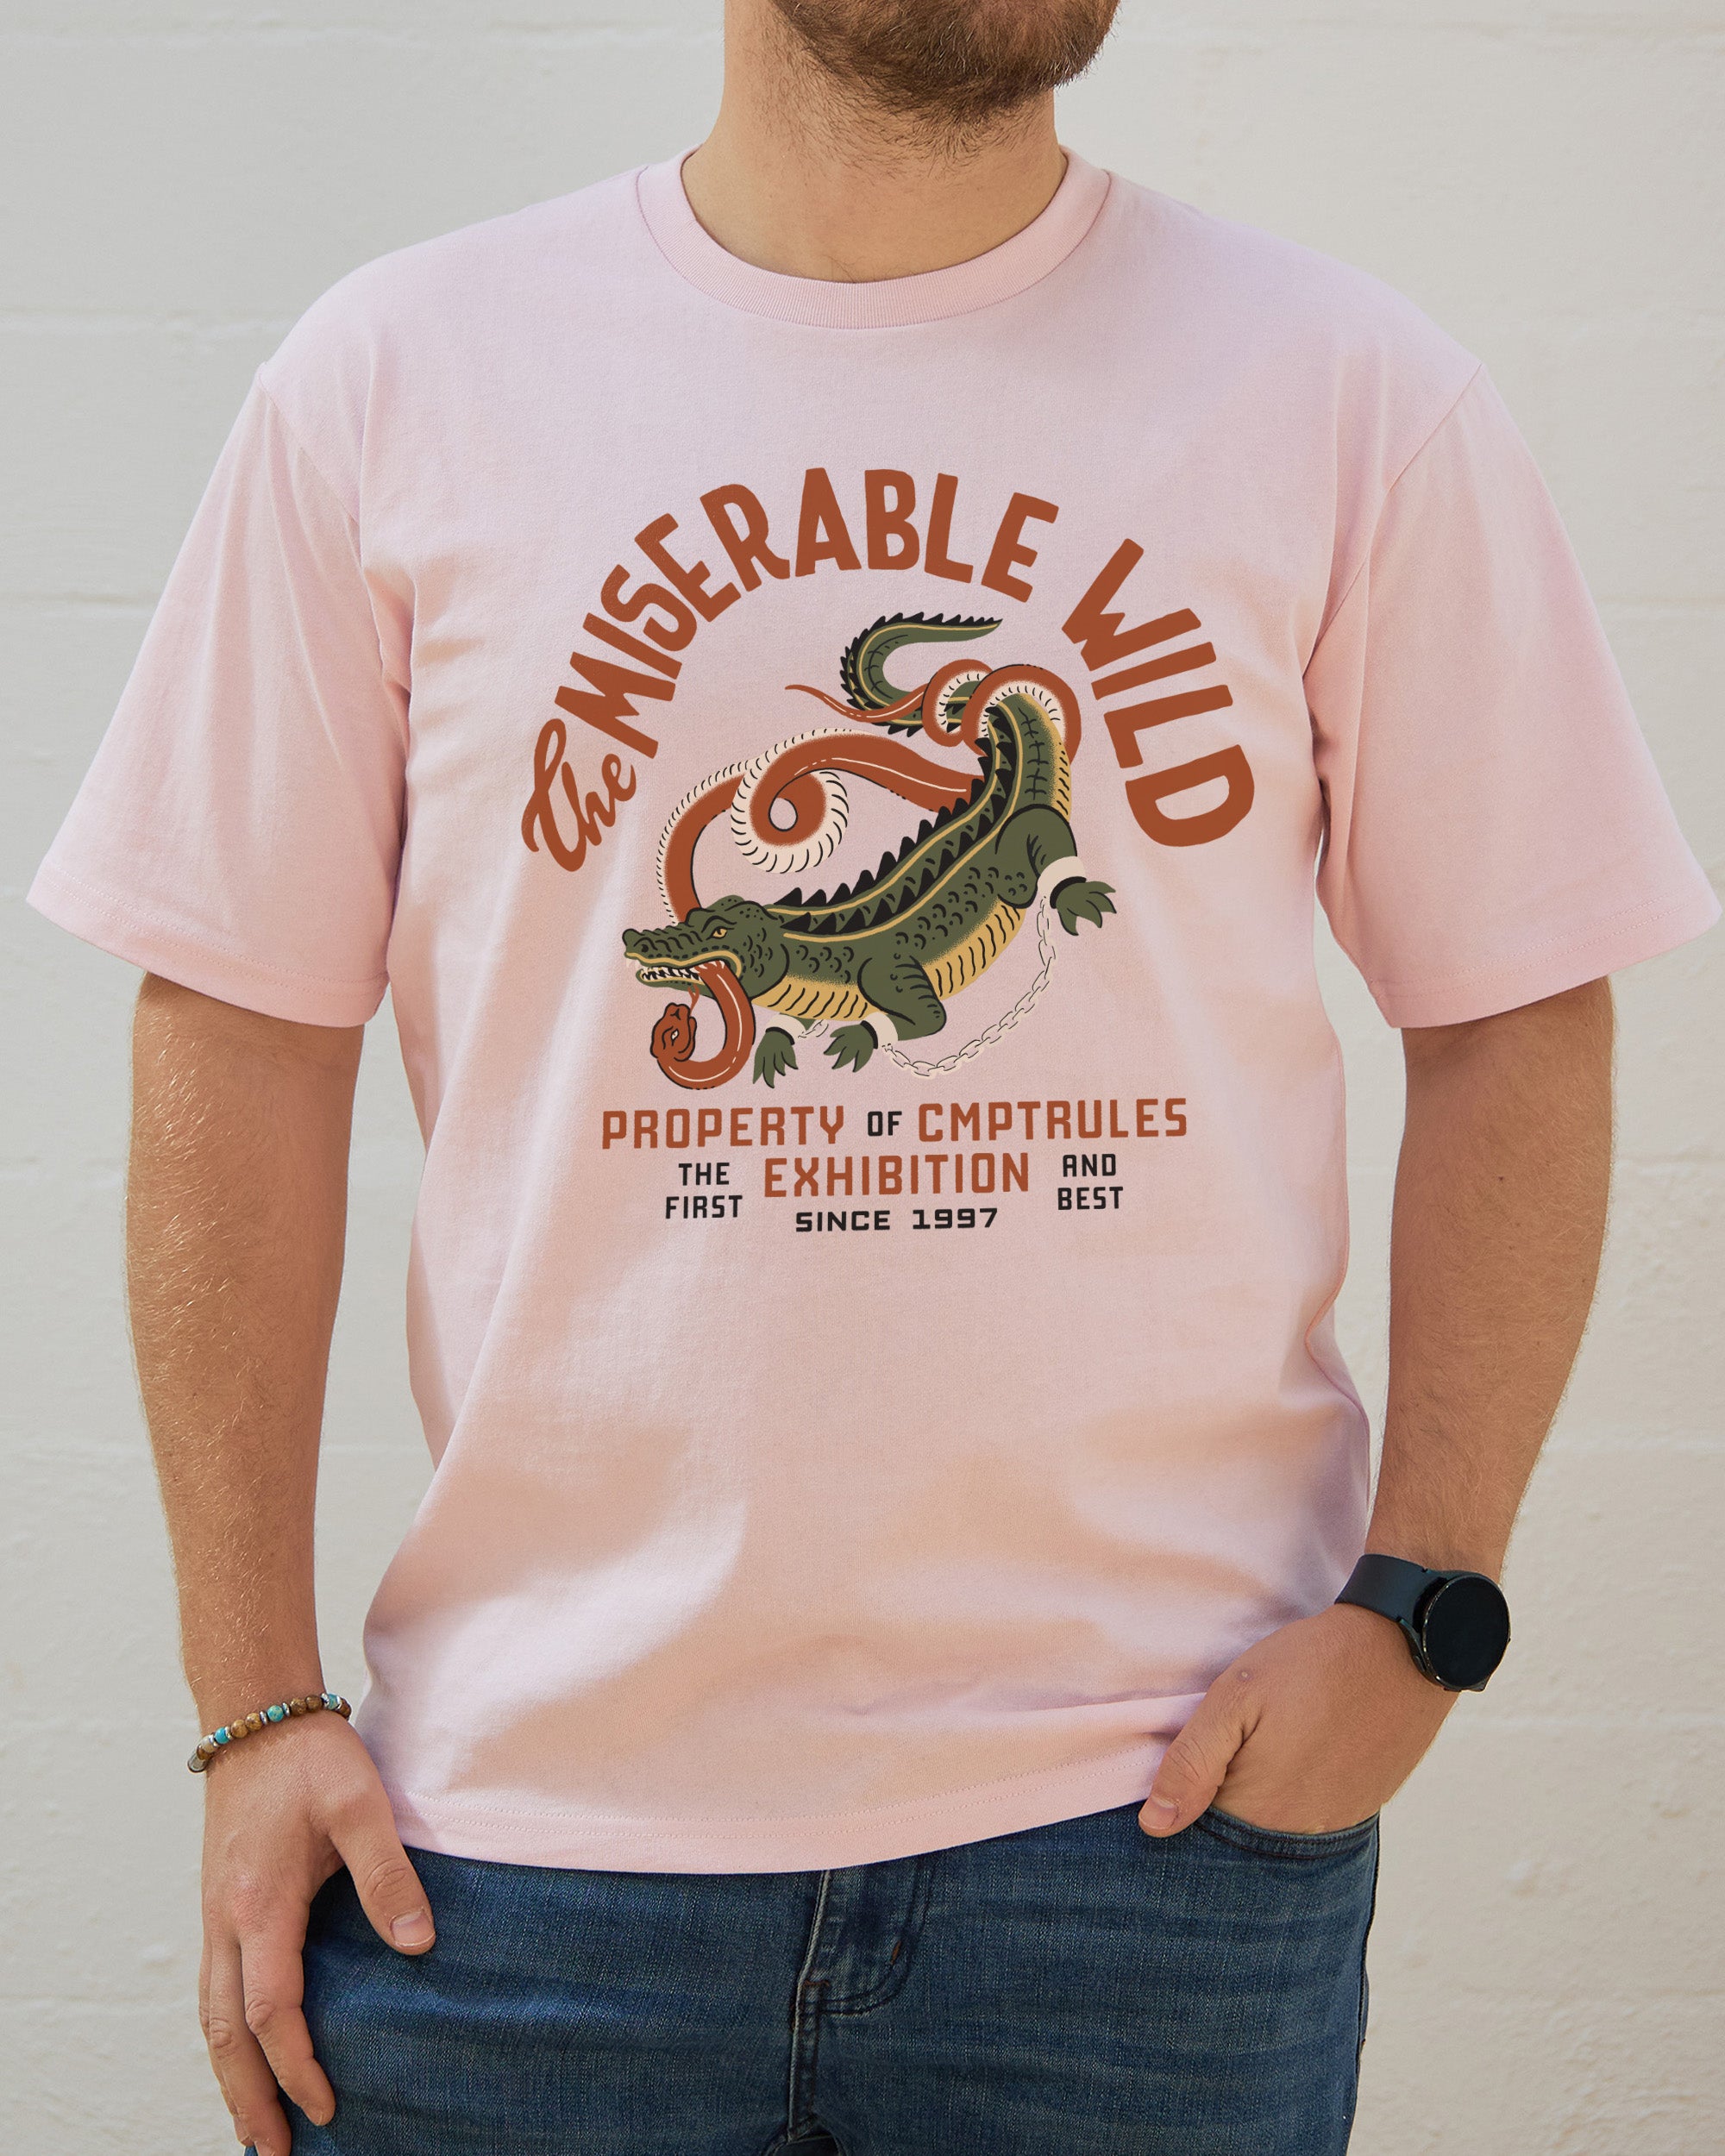 The Miserable Wild T-Shirt